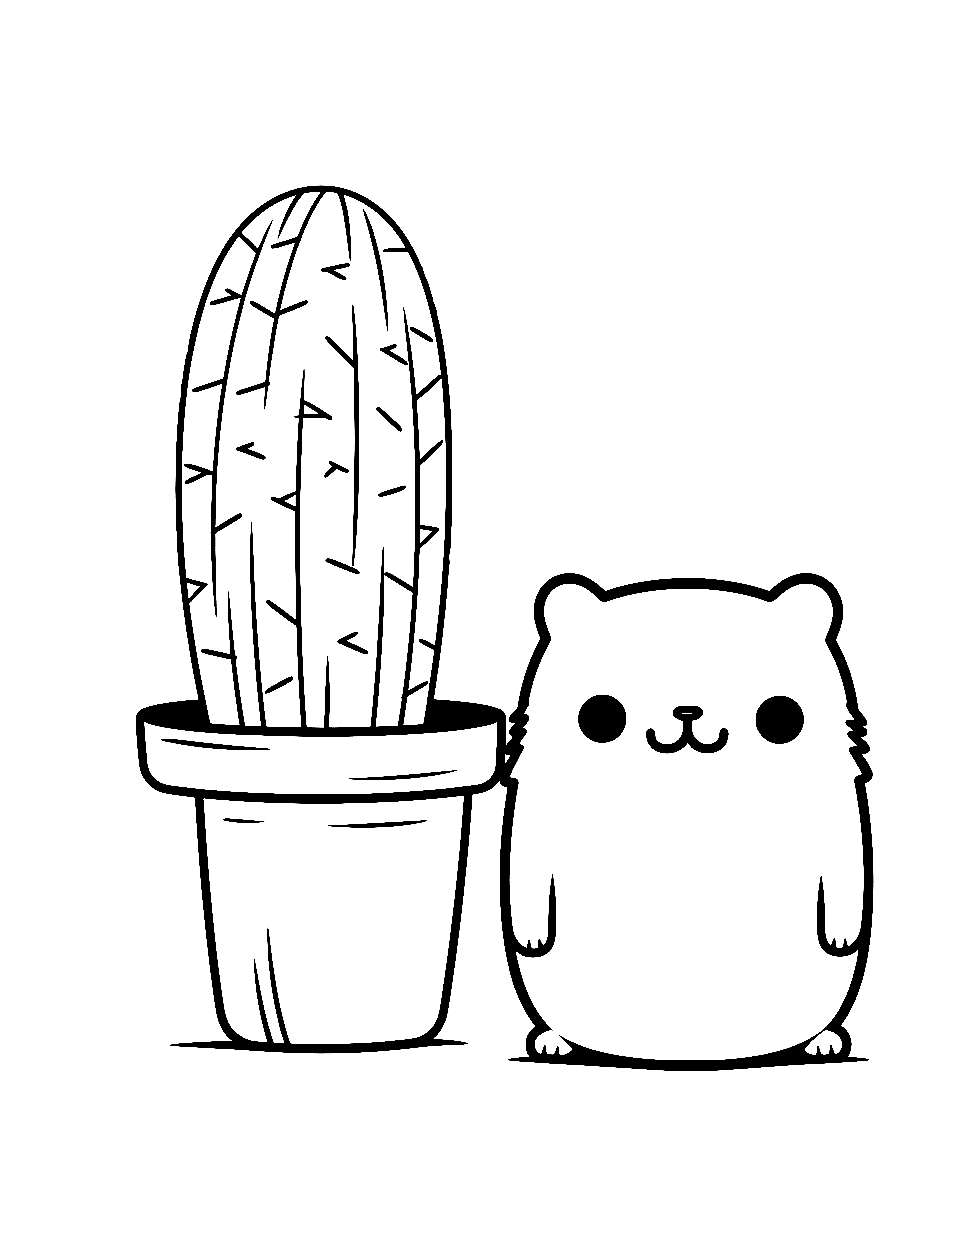 Cactus Pals Coloring Page - Pusheen standing next to a tall cactus, imitating its shape.